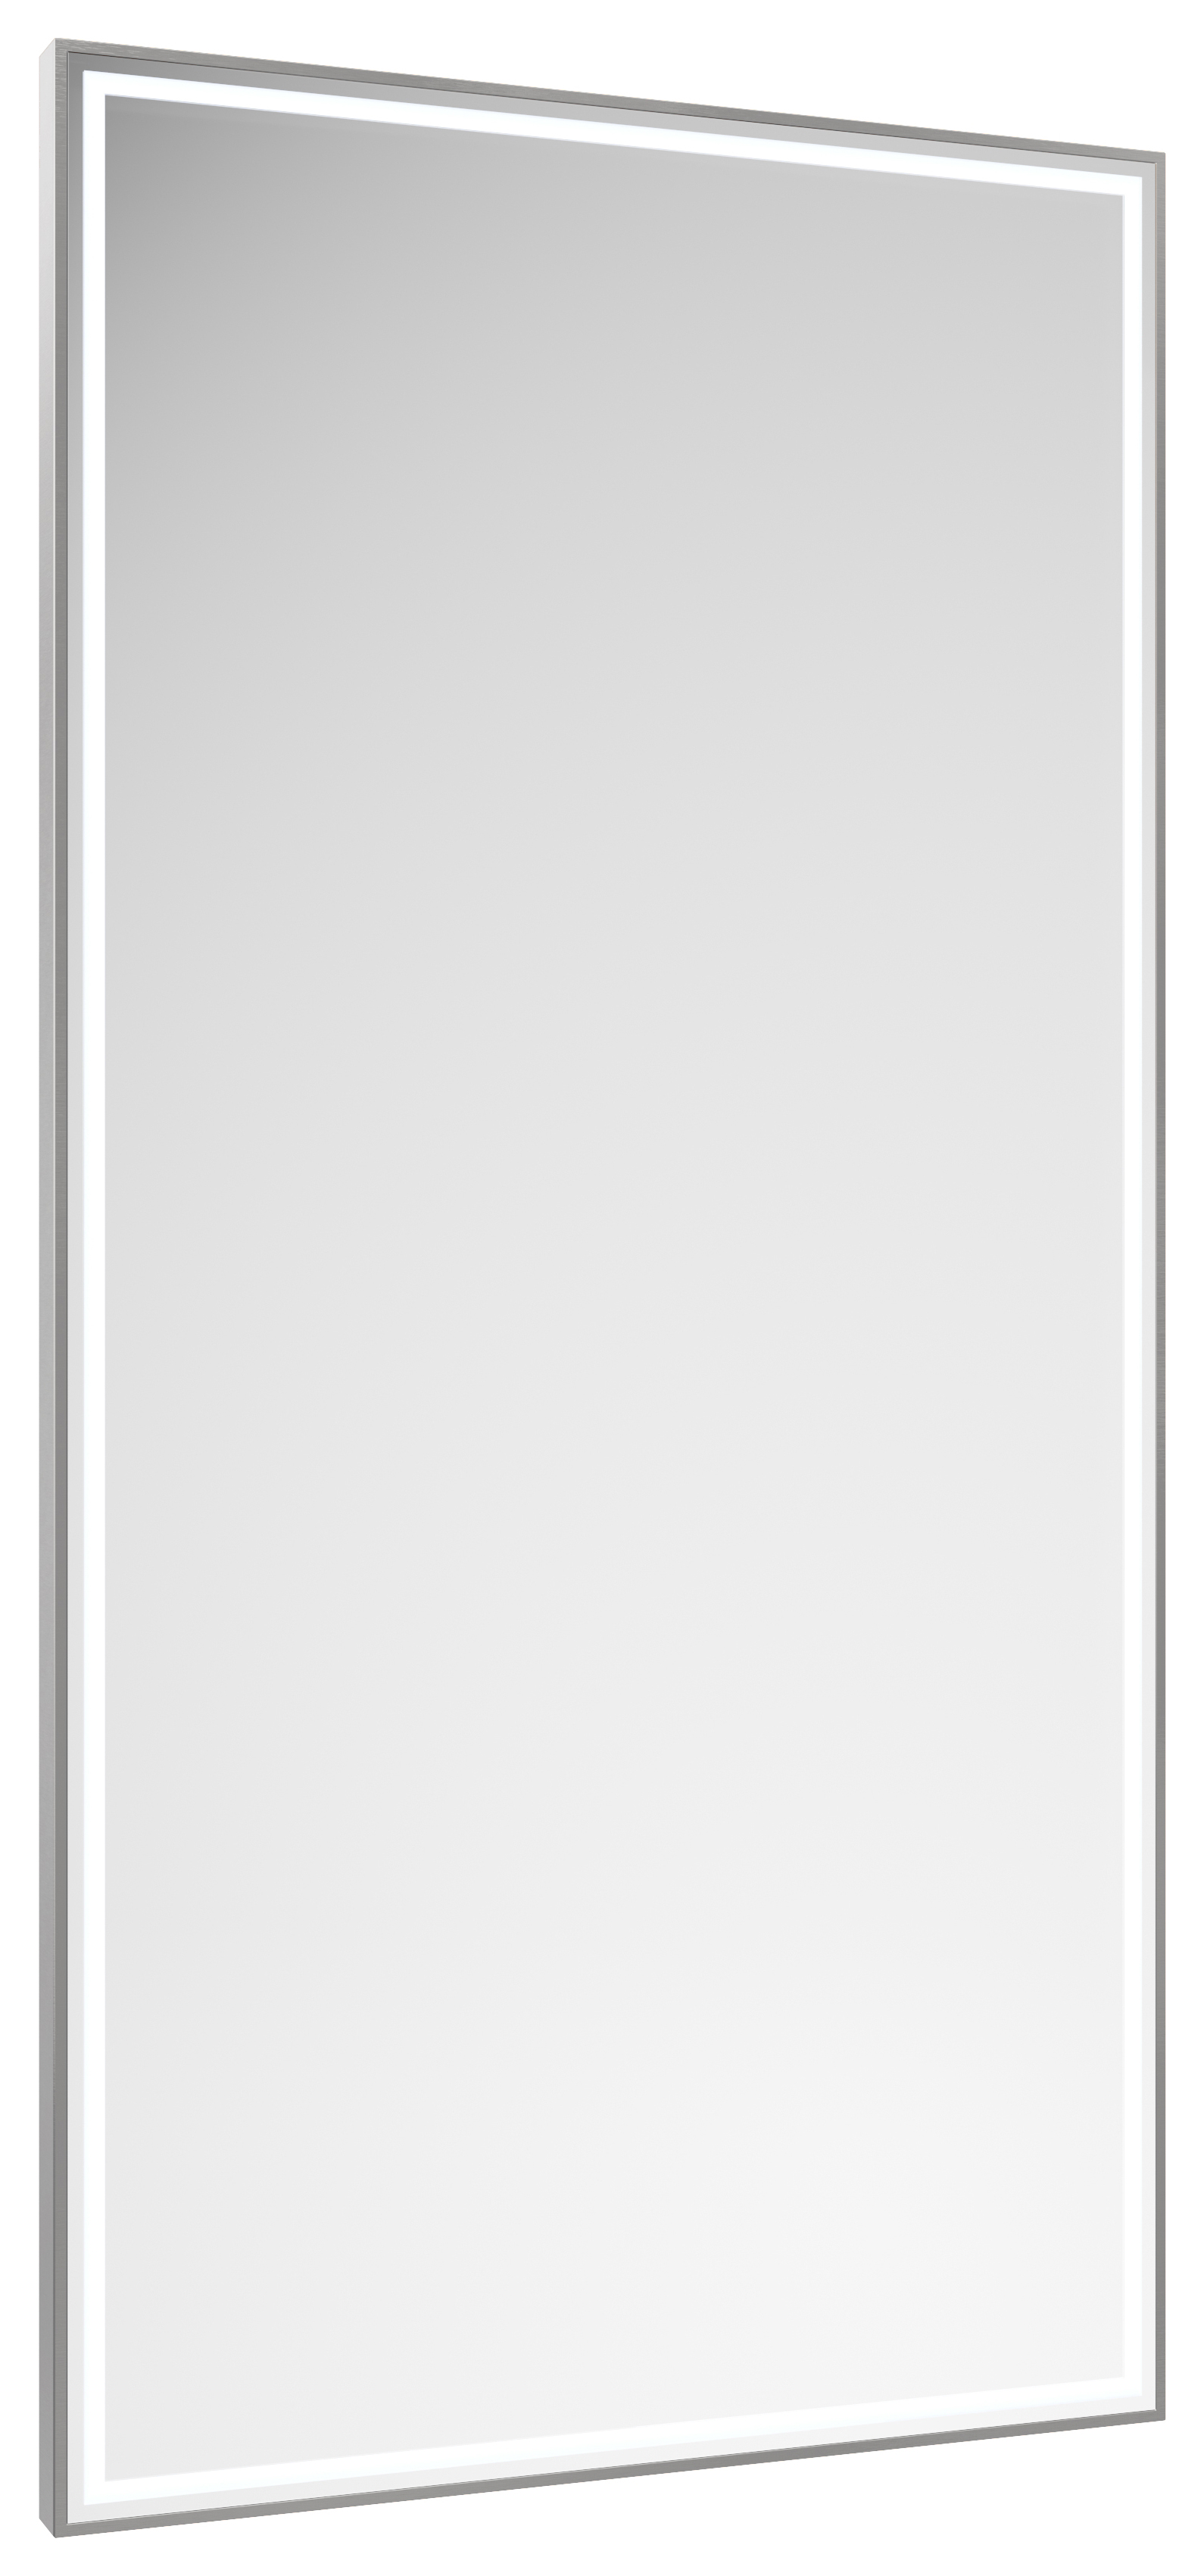 Abacus Melford Silver LED Mirror with Demister - 800 x 500mm